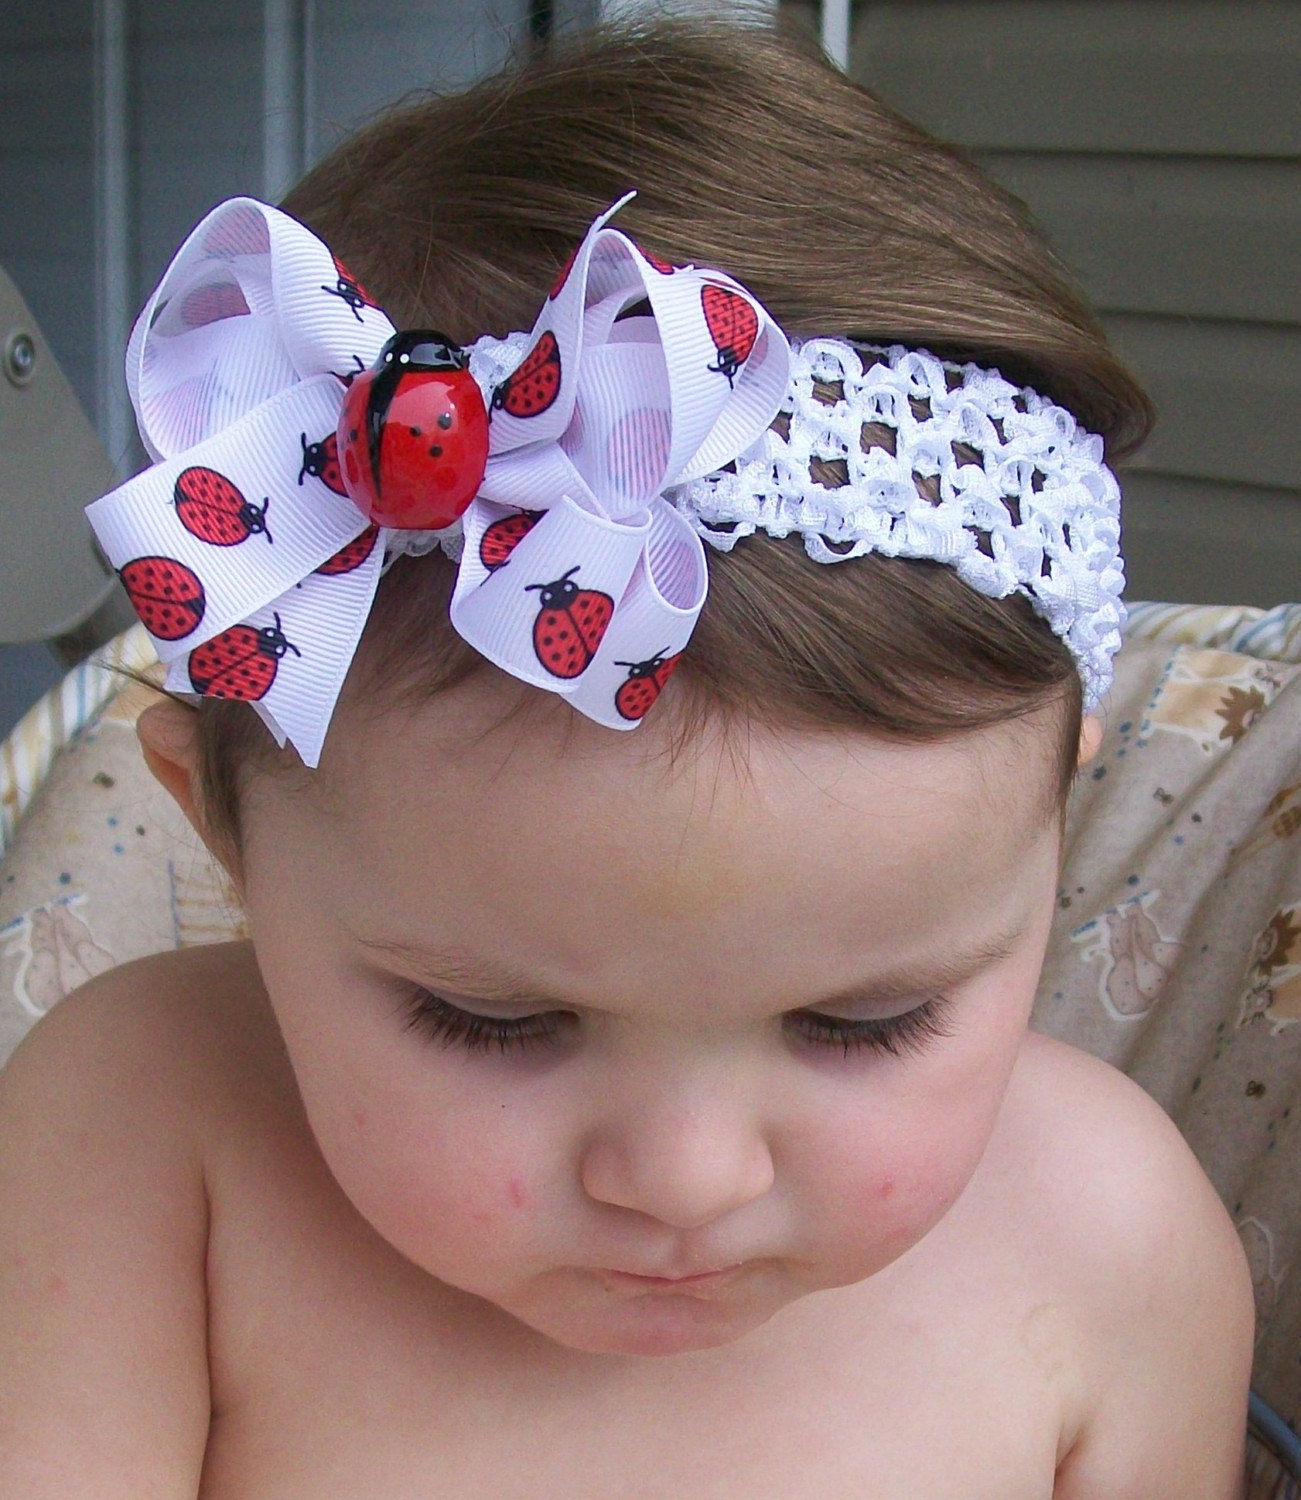 ANNIVERSARY SALE......ITTY BITTY BUG Love..... LADYBUG BOUTIQUE BOW....ONE DOLLAR SHIPPING